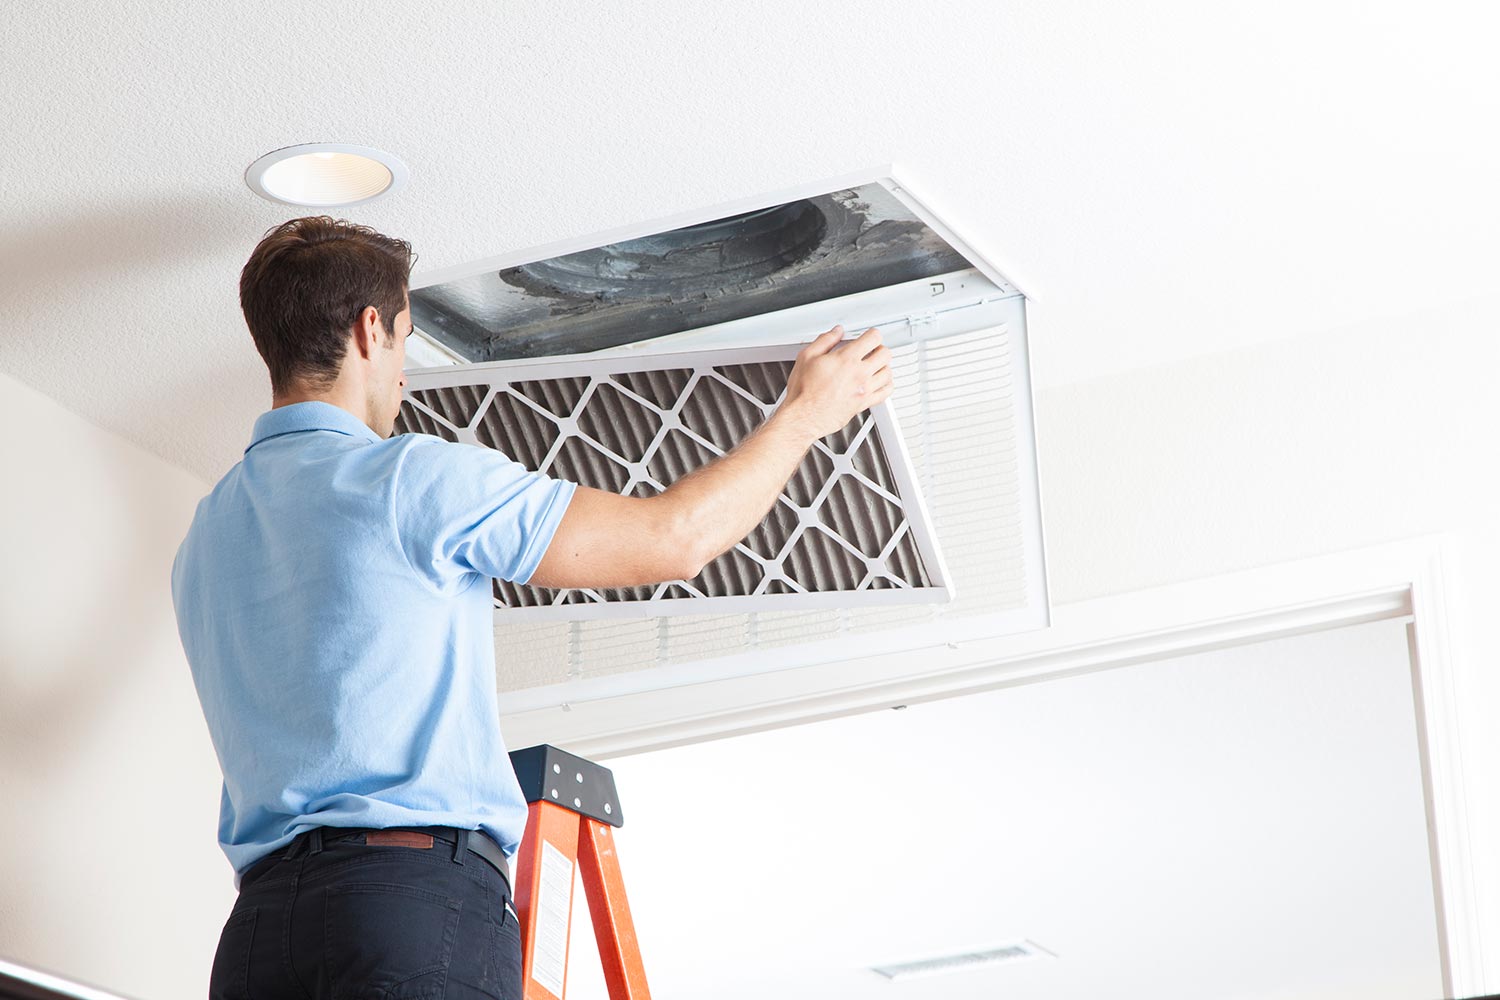 Man cleaning air ducts in home